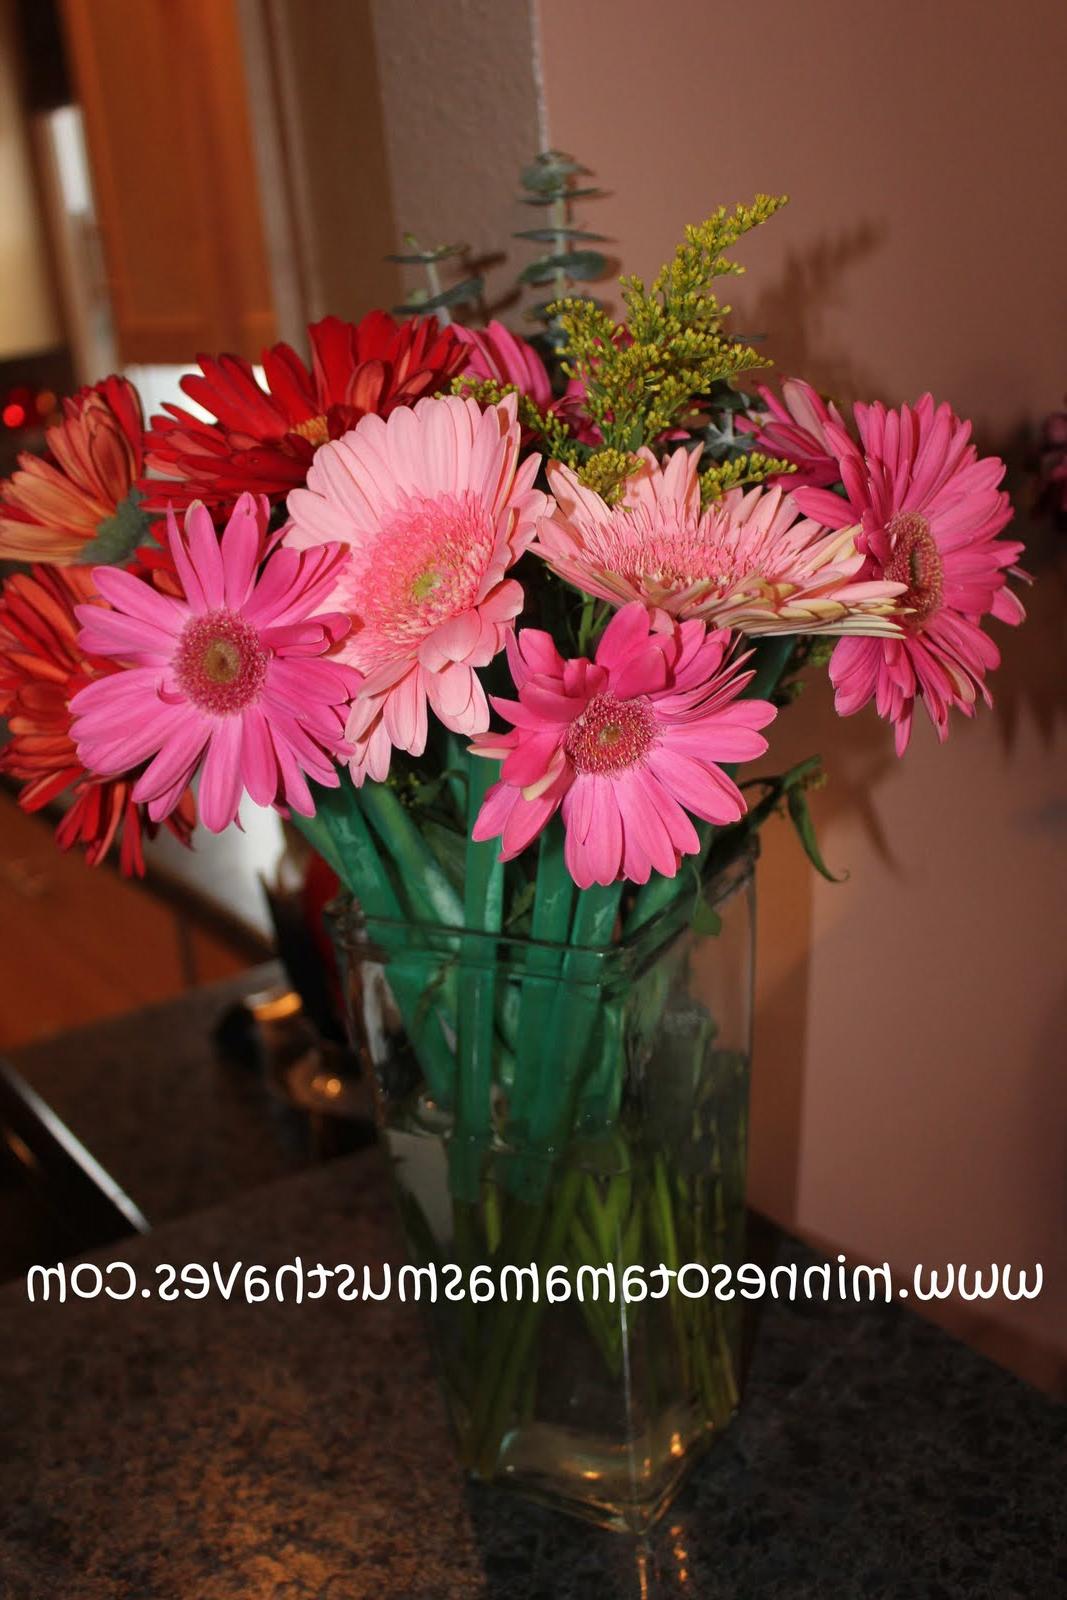 I received the Gerbera Daisies